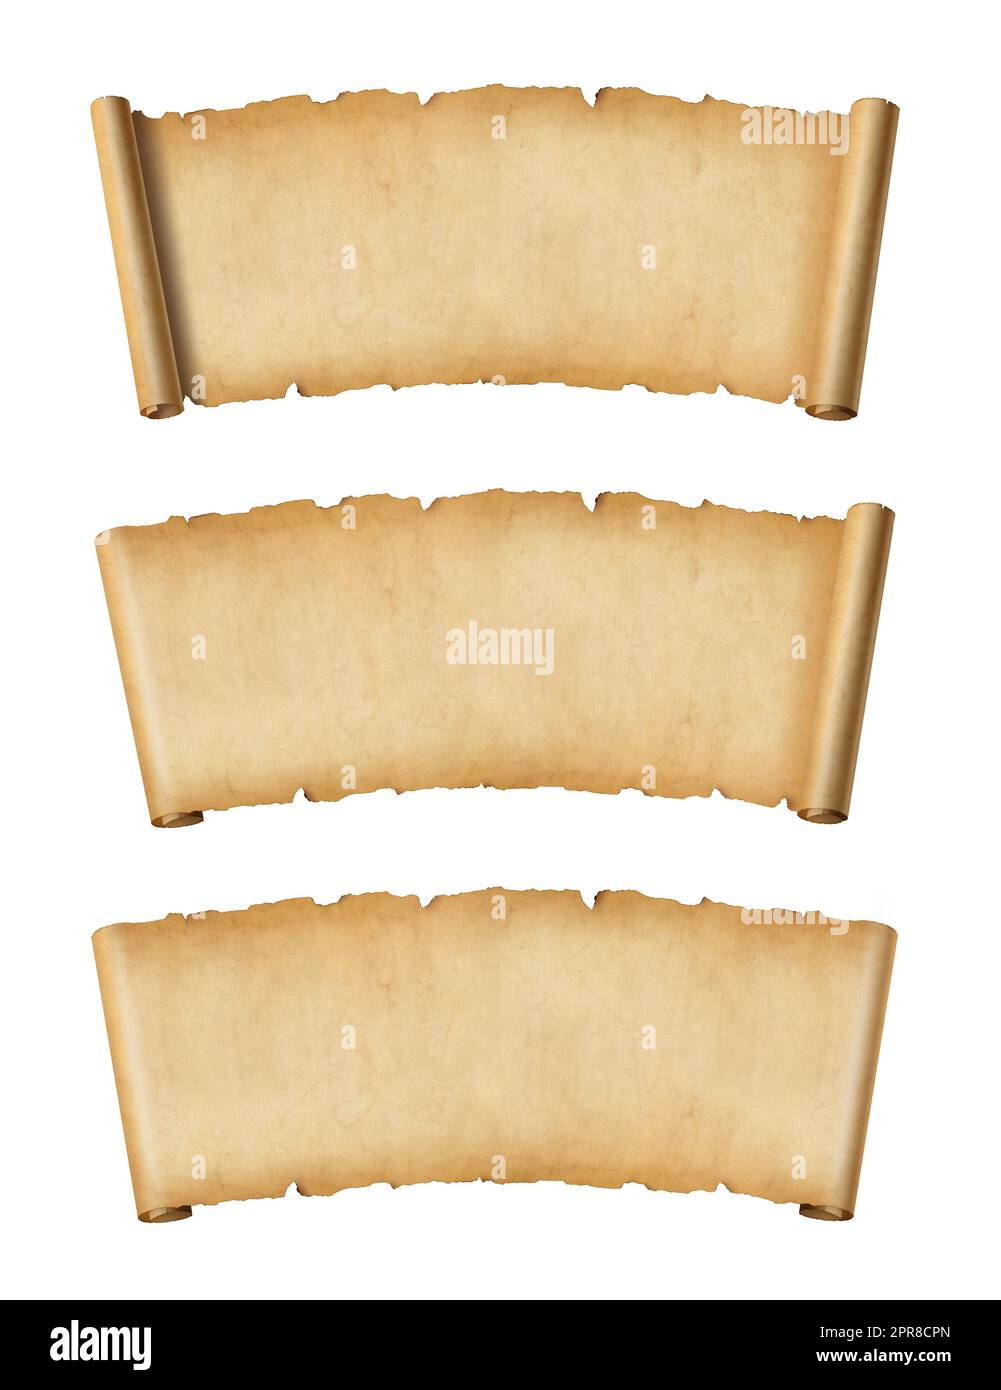 Old Parchment paper scroll set isolated on white. Horizontal banners Stock Photo